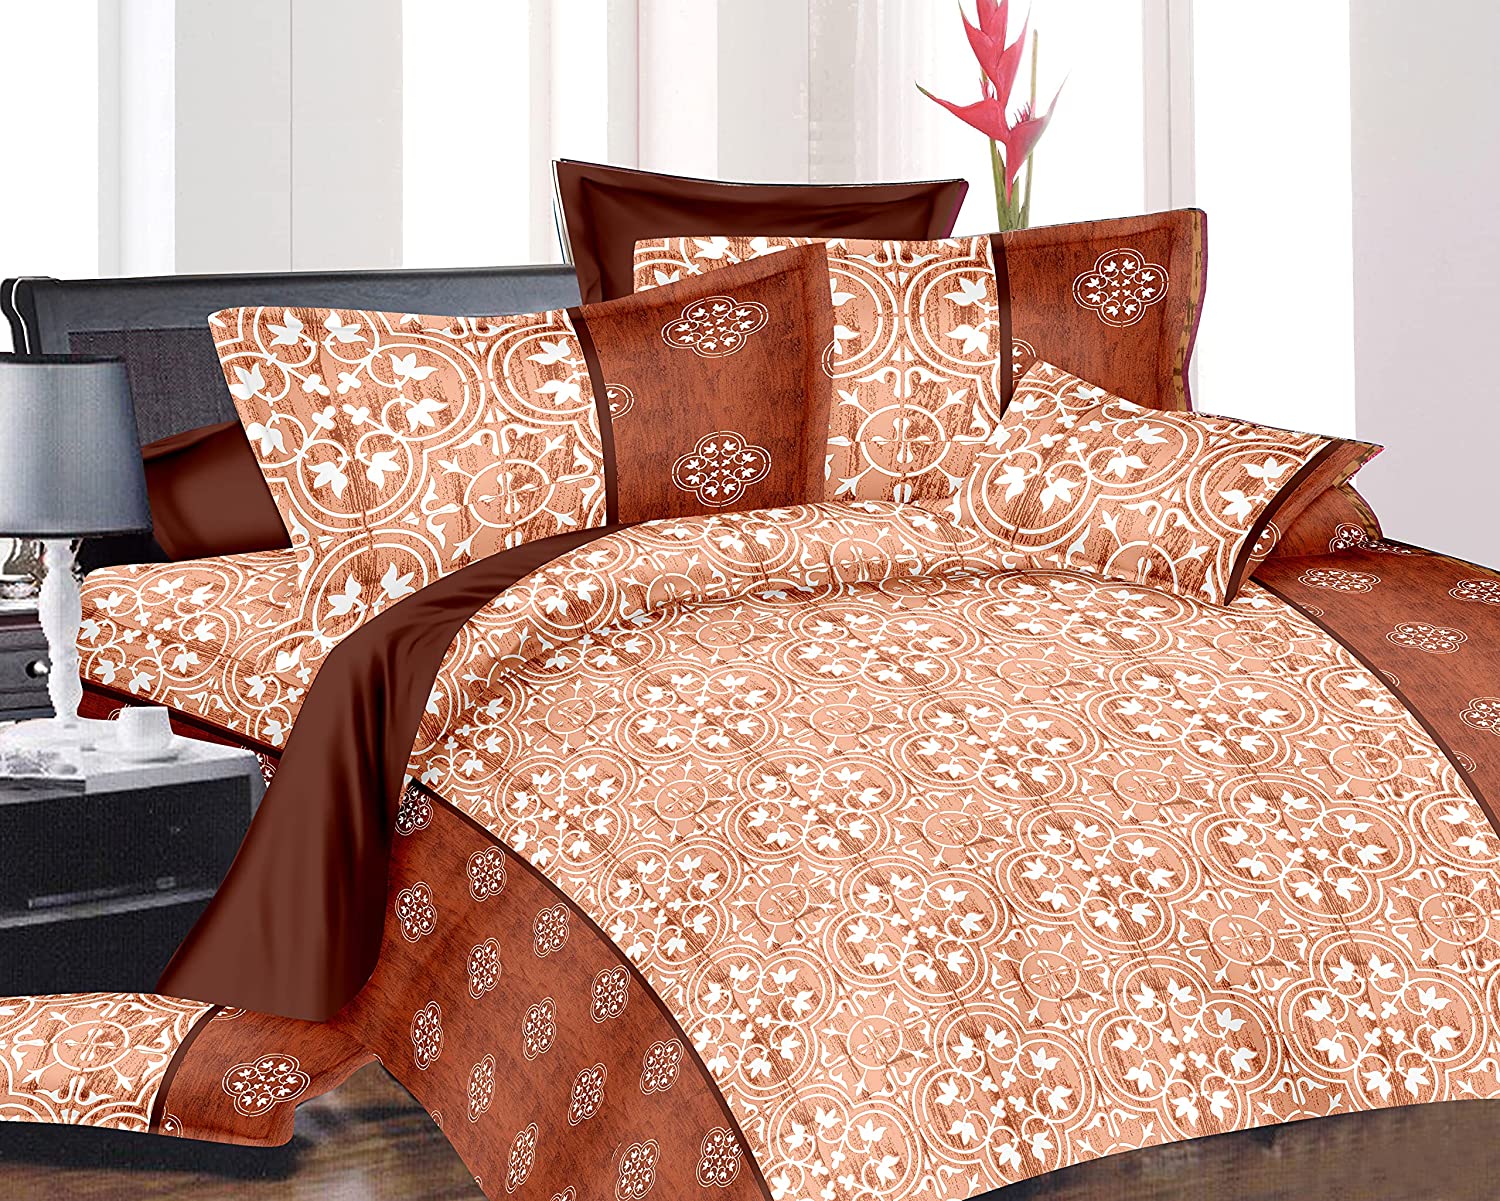 Sleeping Owls Satiny Printed 100% Soft Cotton 210 Tc Super King Bedsheet with 2Pc Pillow Cover-274 cm X 274 cm - S-108 (Rust)